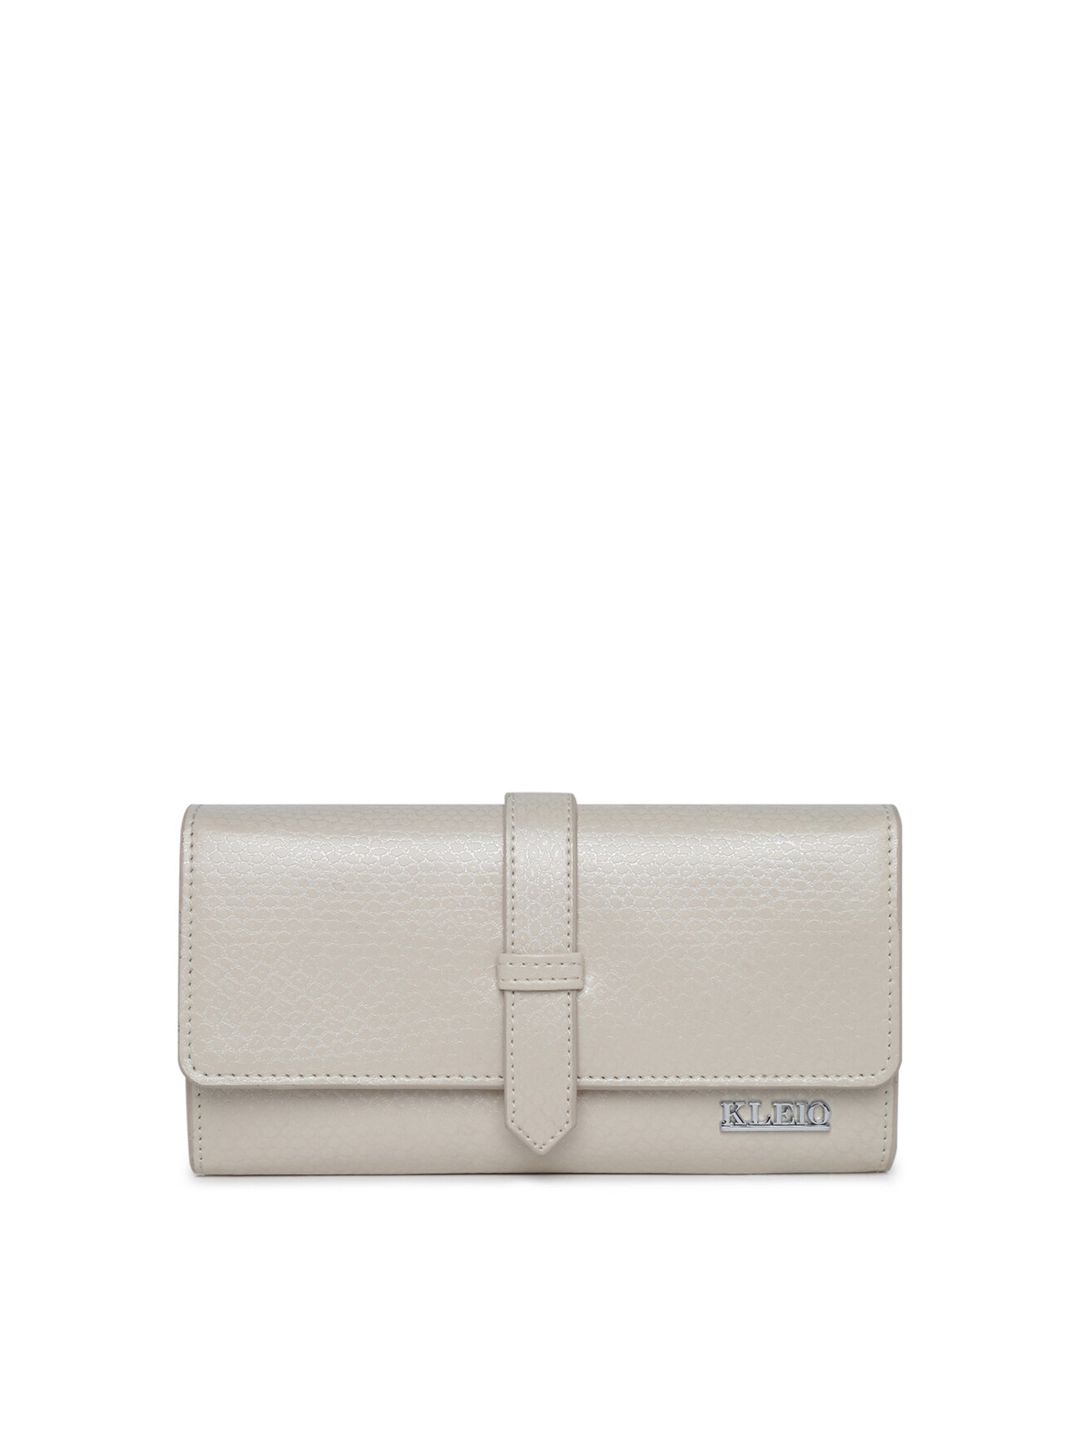 KLEIO Women Cream Solid Synthetic Leather Two Fold Wallet Price in India